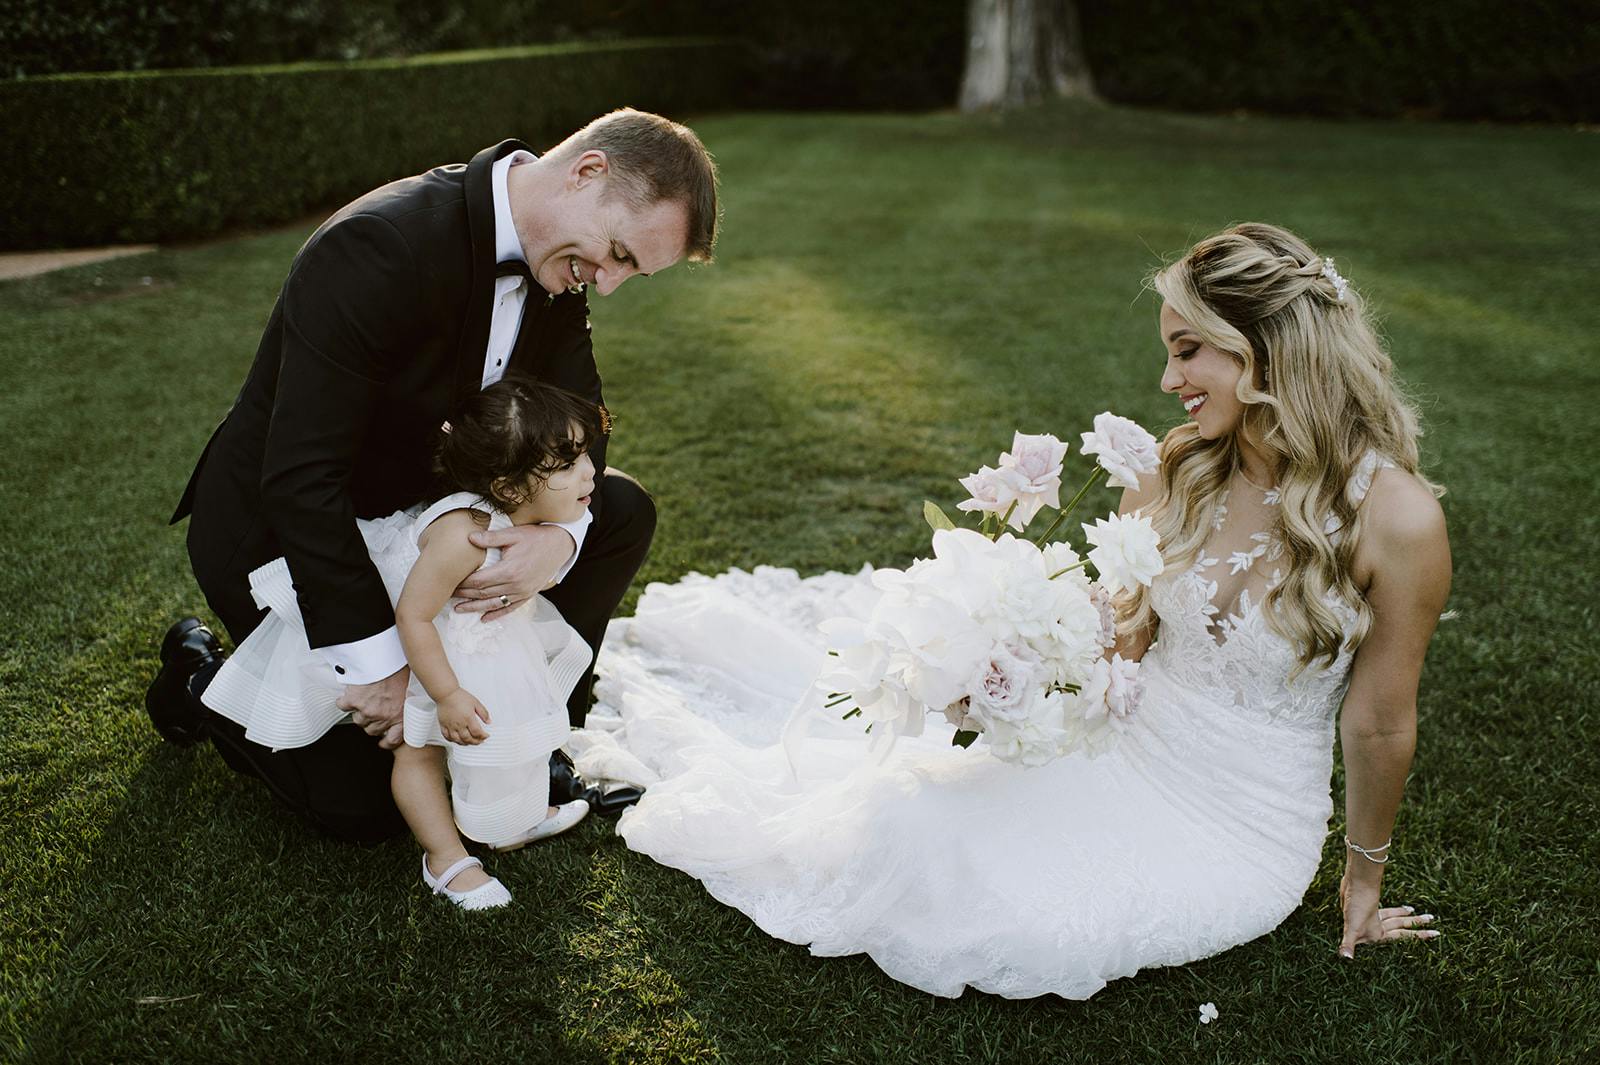 Bride, groom and daughter sitting on grass